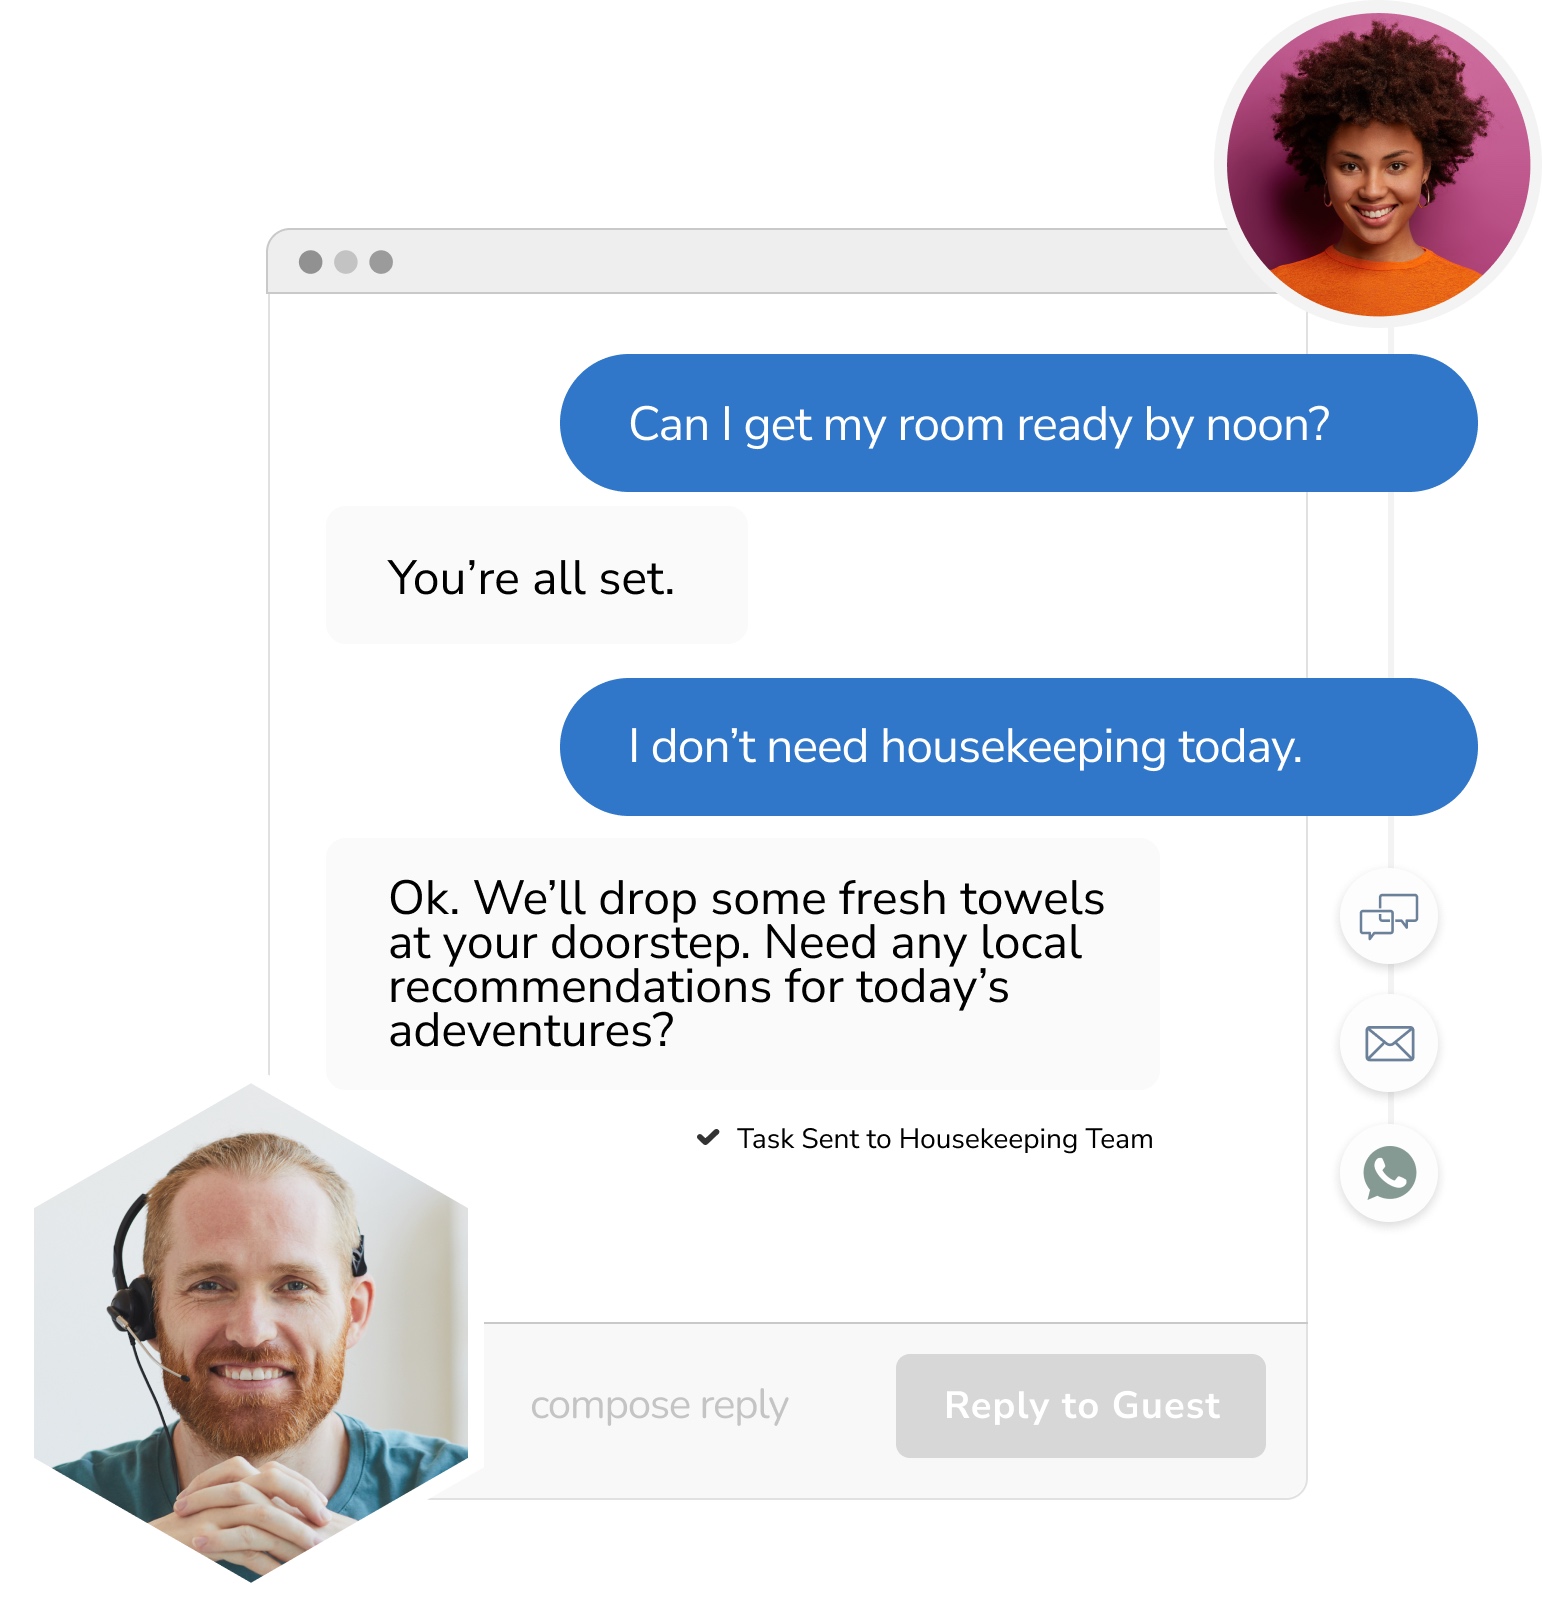 Image of chat conversation using Revinate Ivy software